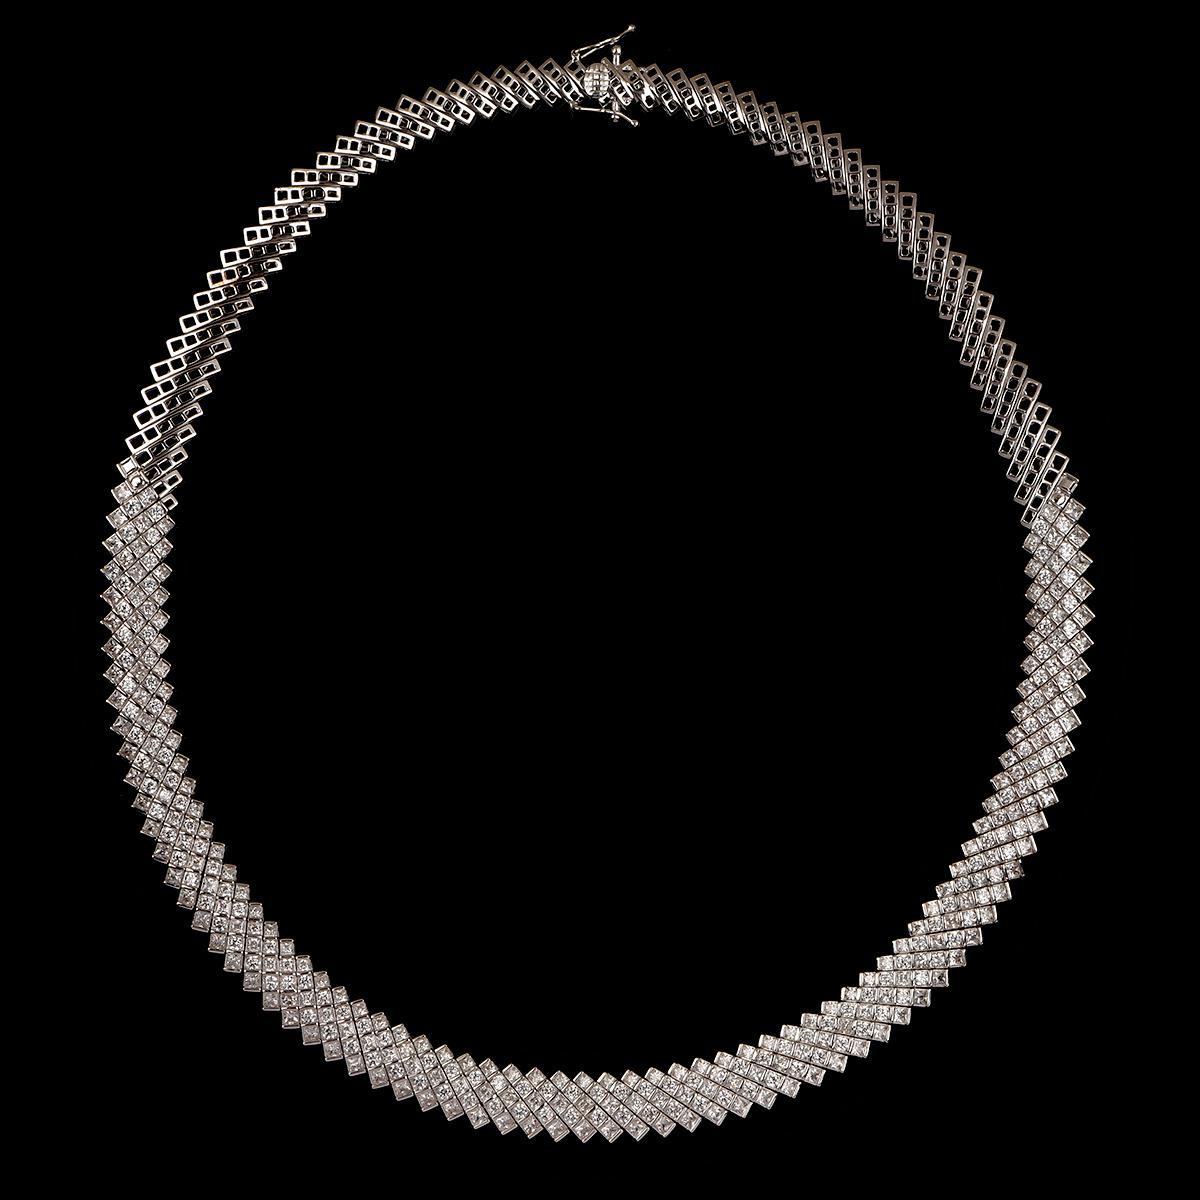 Exquisitely designed diamond mesh necklace studded with 136 brilliant cut and 205 princess cut diamonds in channel setting and fashioned in 18 karat white gold. The diamonds are graded H-I Color, I2 Clarity.